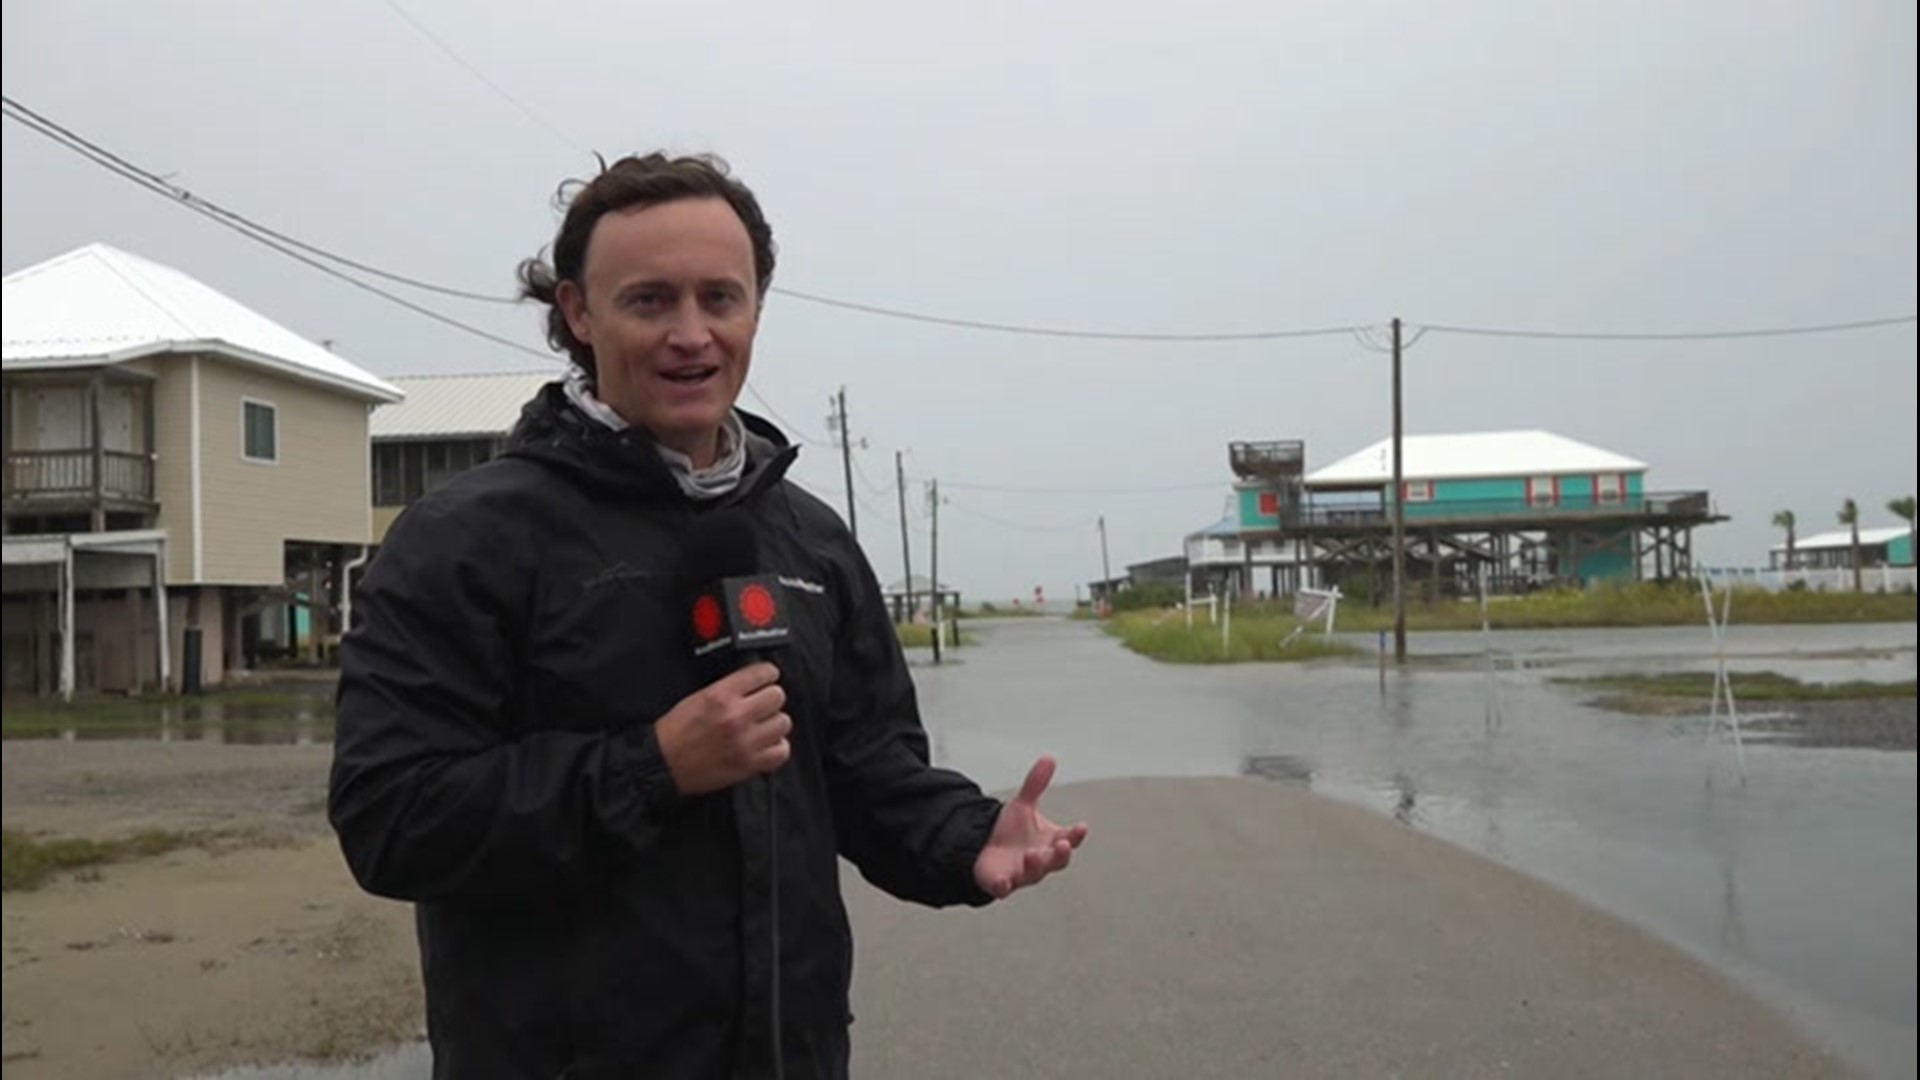 It's been a stressful hurricane season for Louisiana. Jonathan Petramala is in Grand Isle where the area braces for their 7th evacuation, this time for Hurricane Zeta.